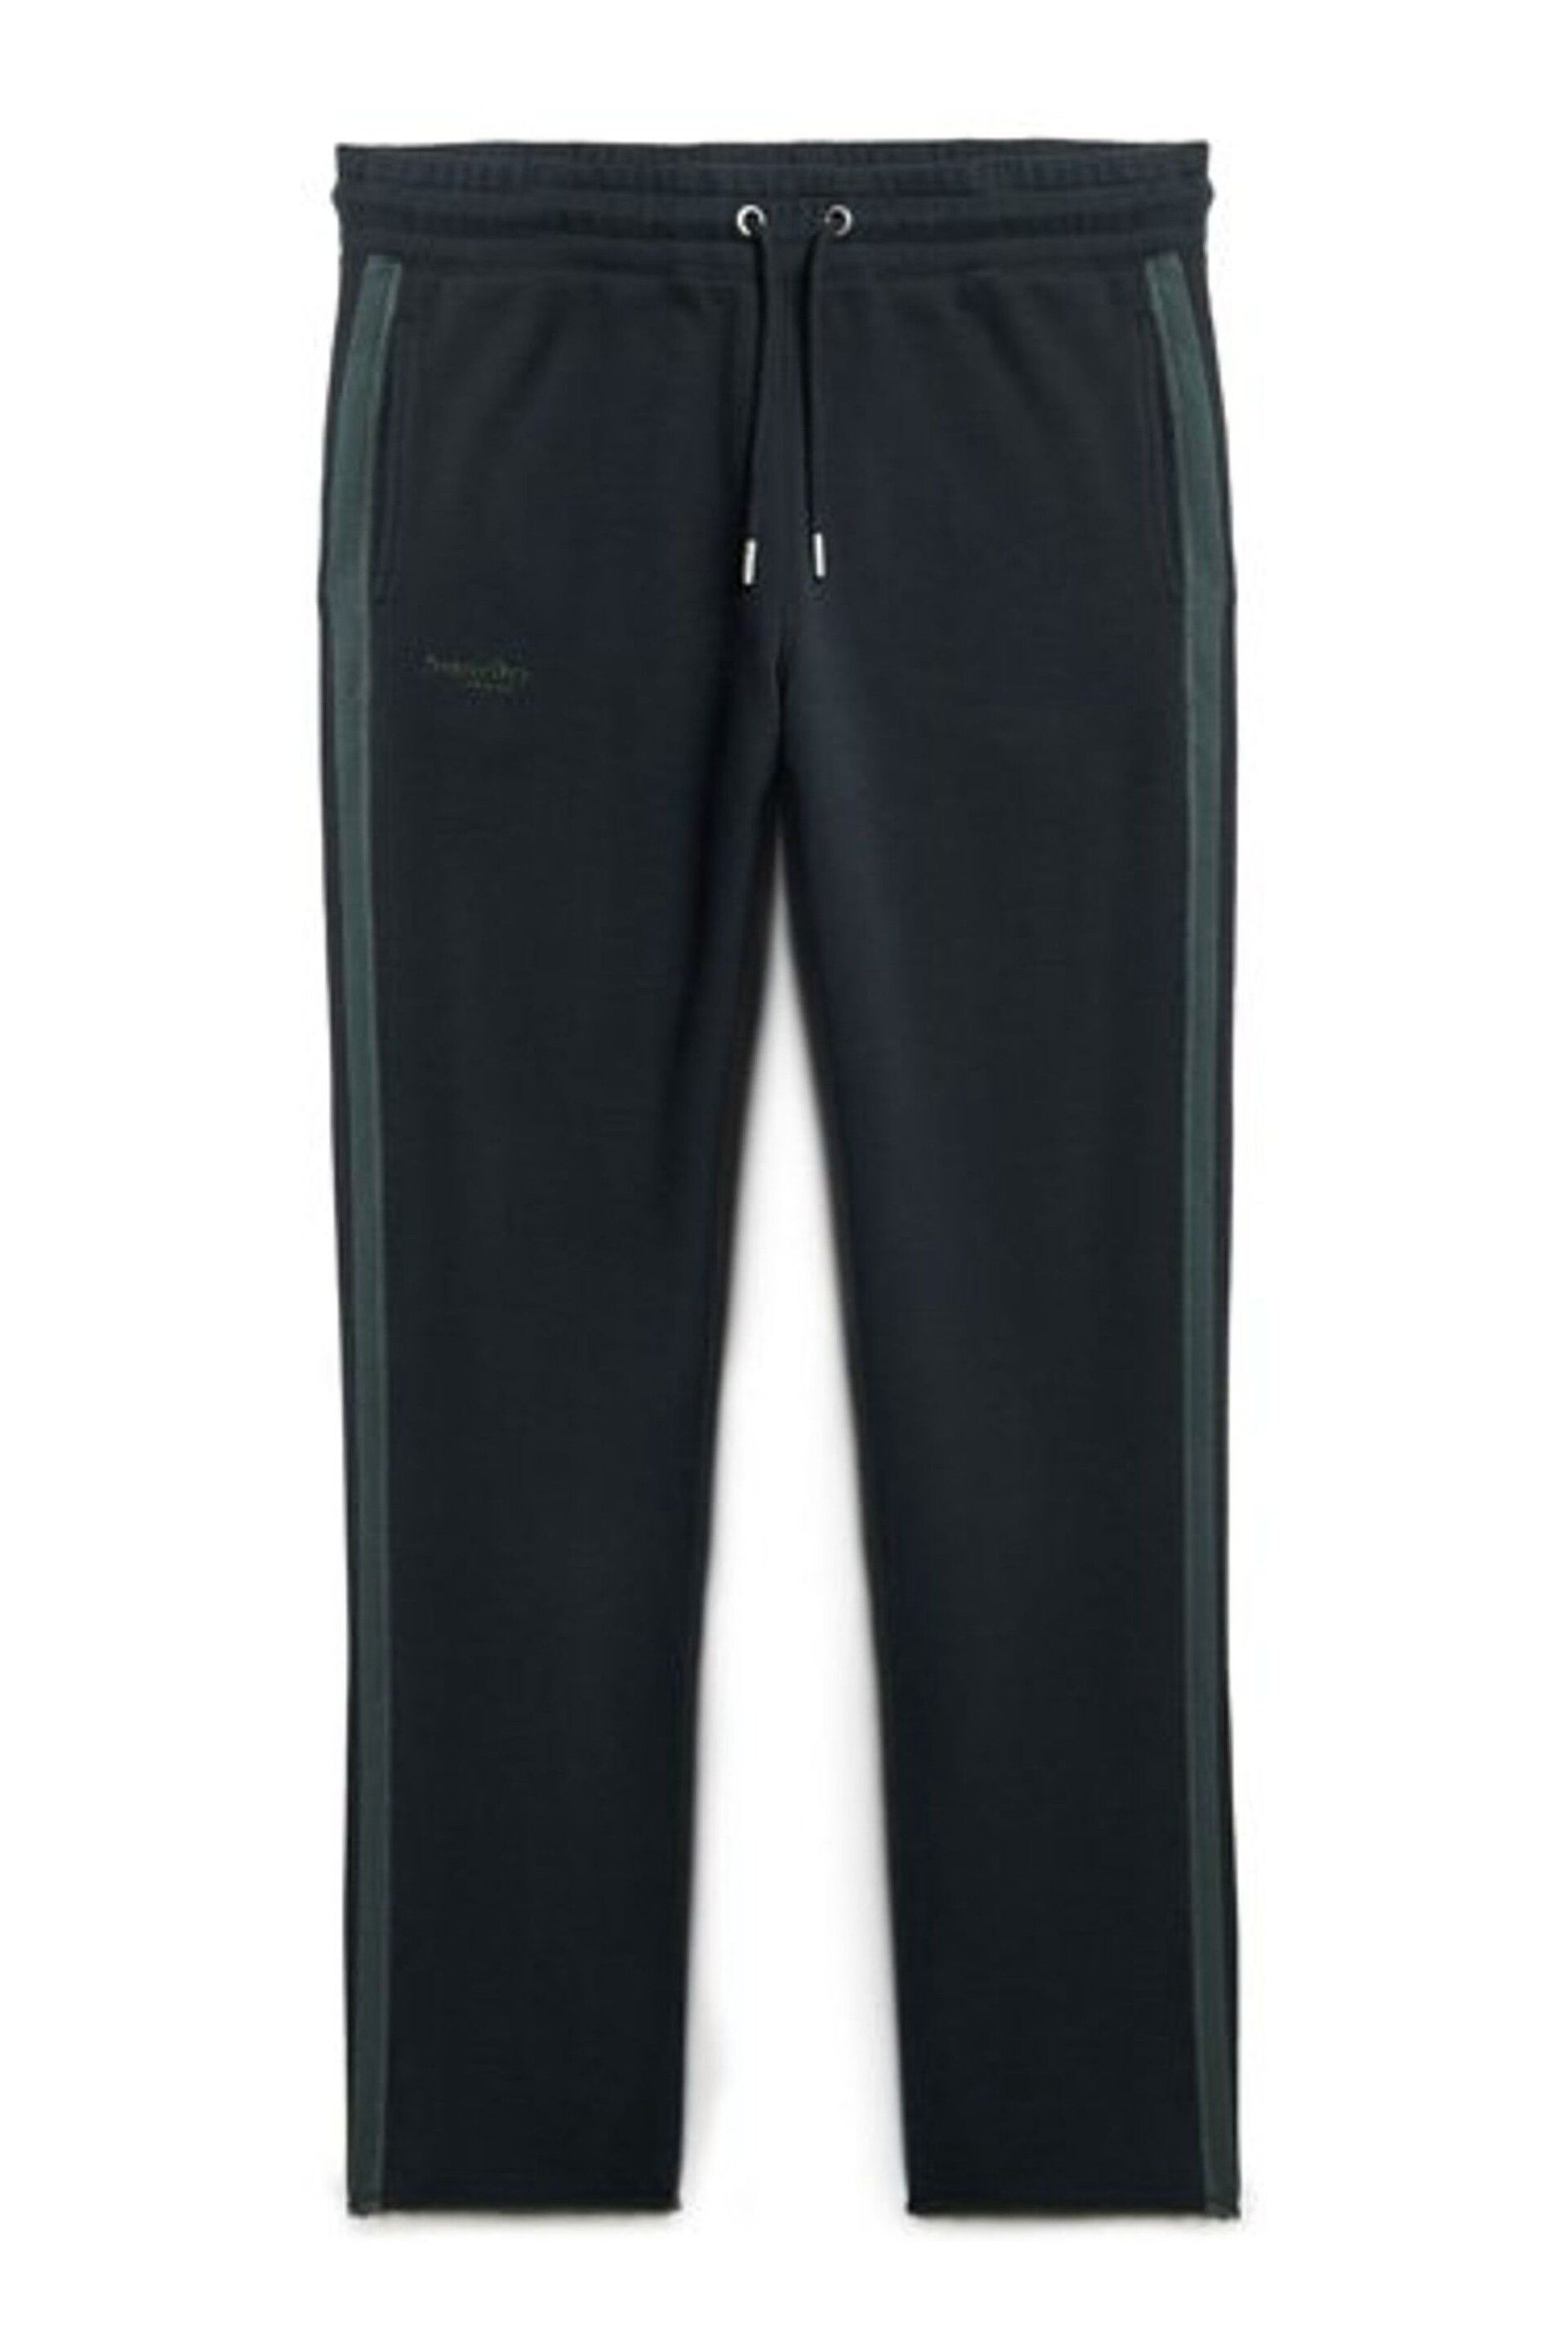 Superdry Black Essential Straight Joggers - Image 4 of 6